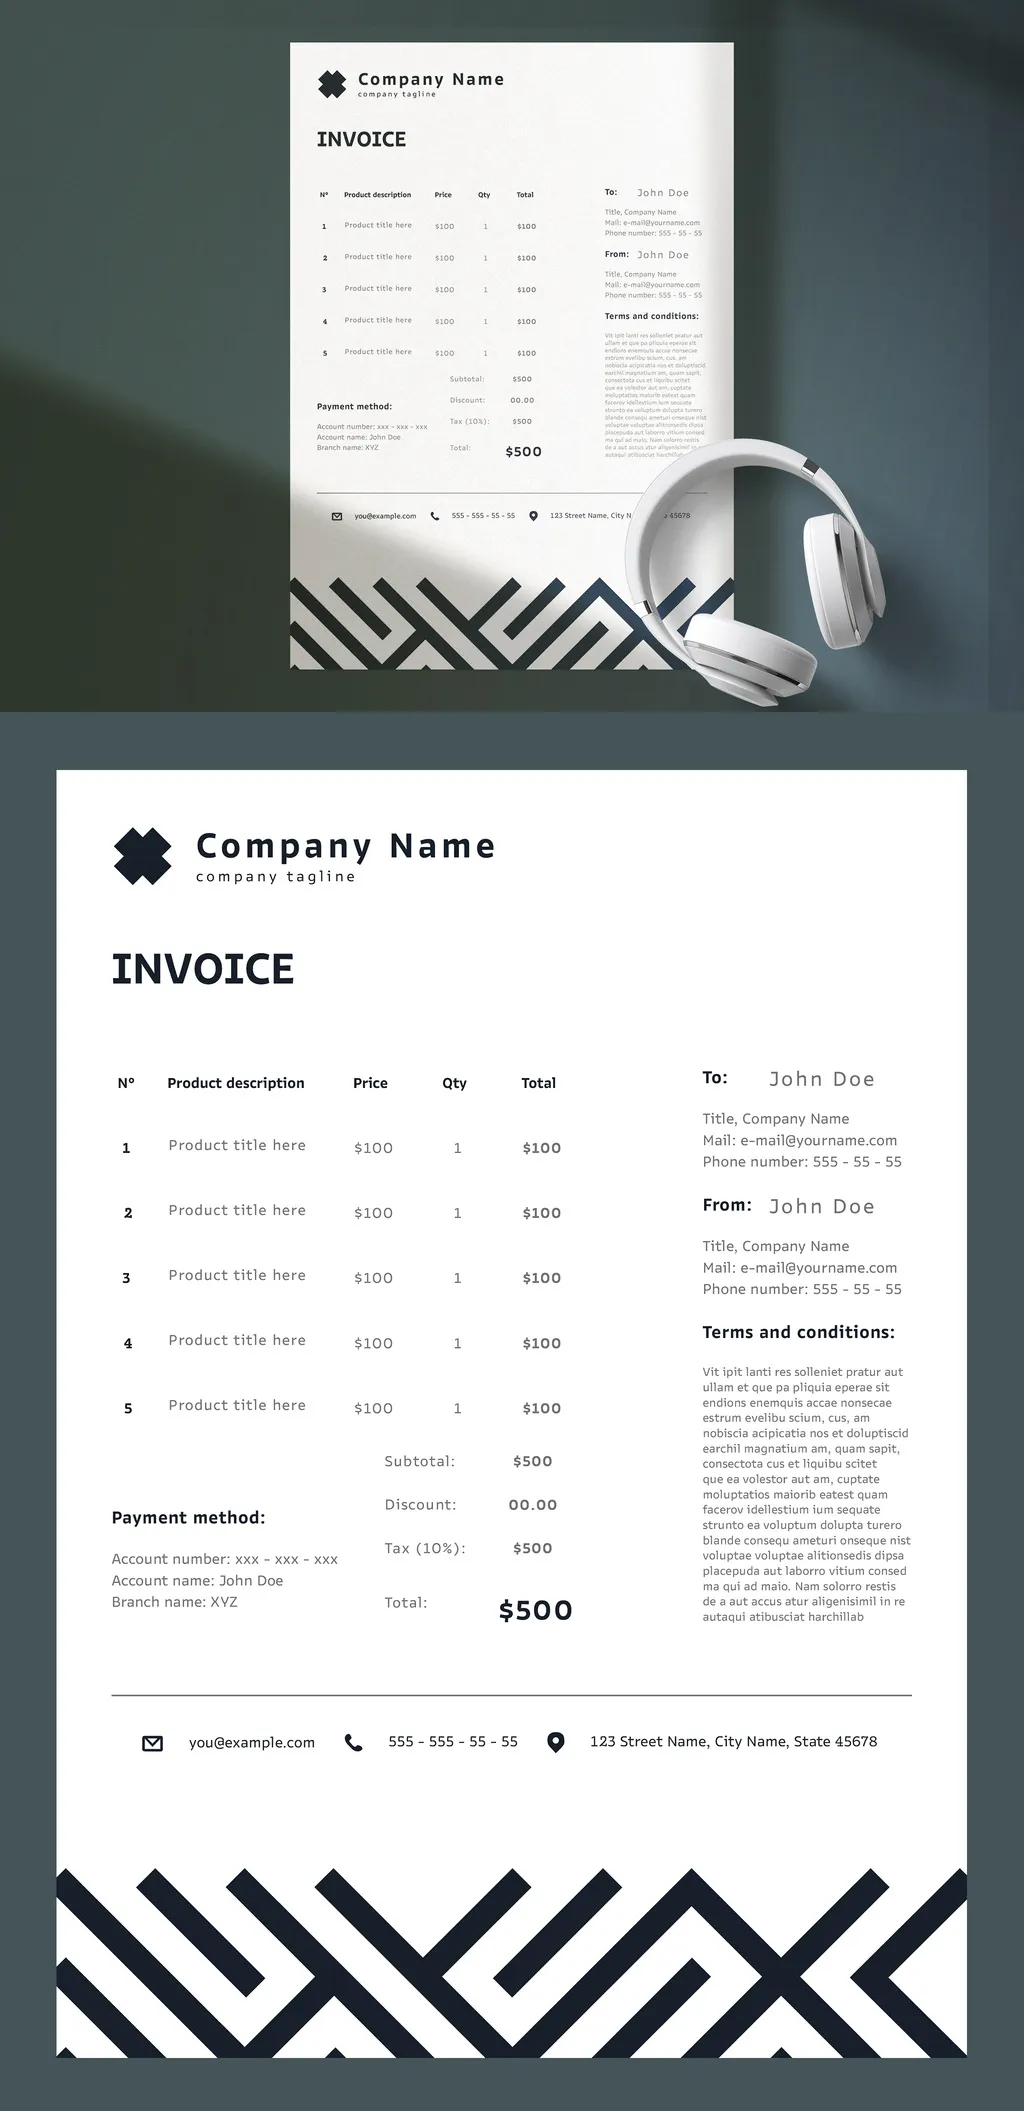 Adobestock - Modern Invoice Layout with Pink Accents 758299467